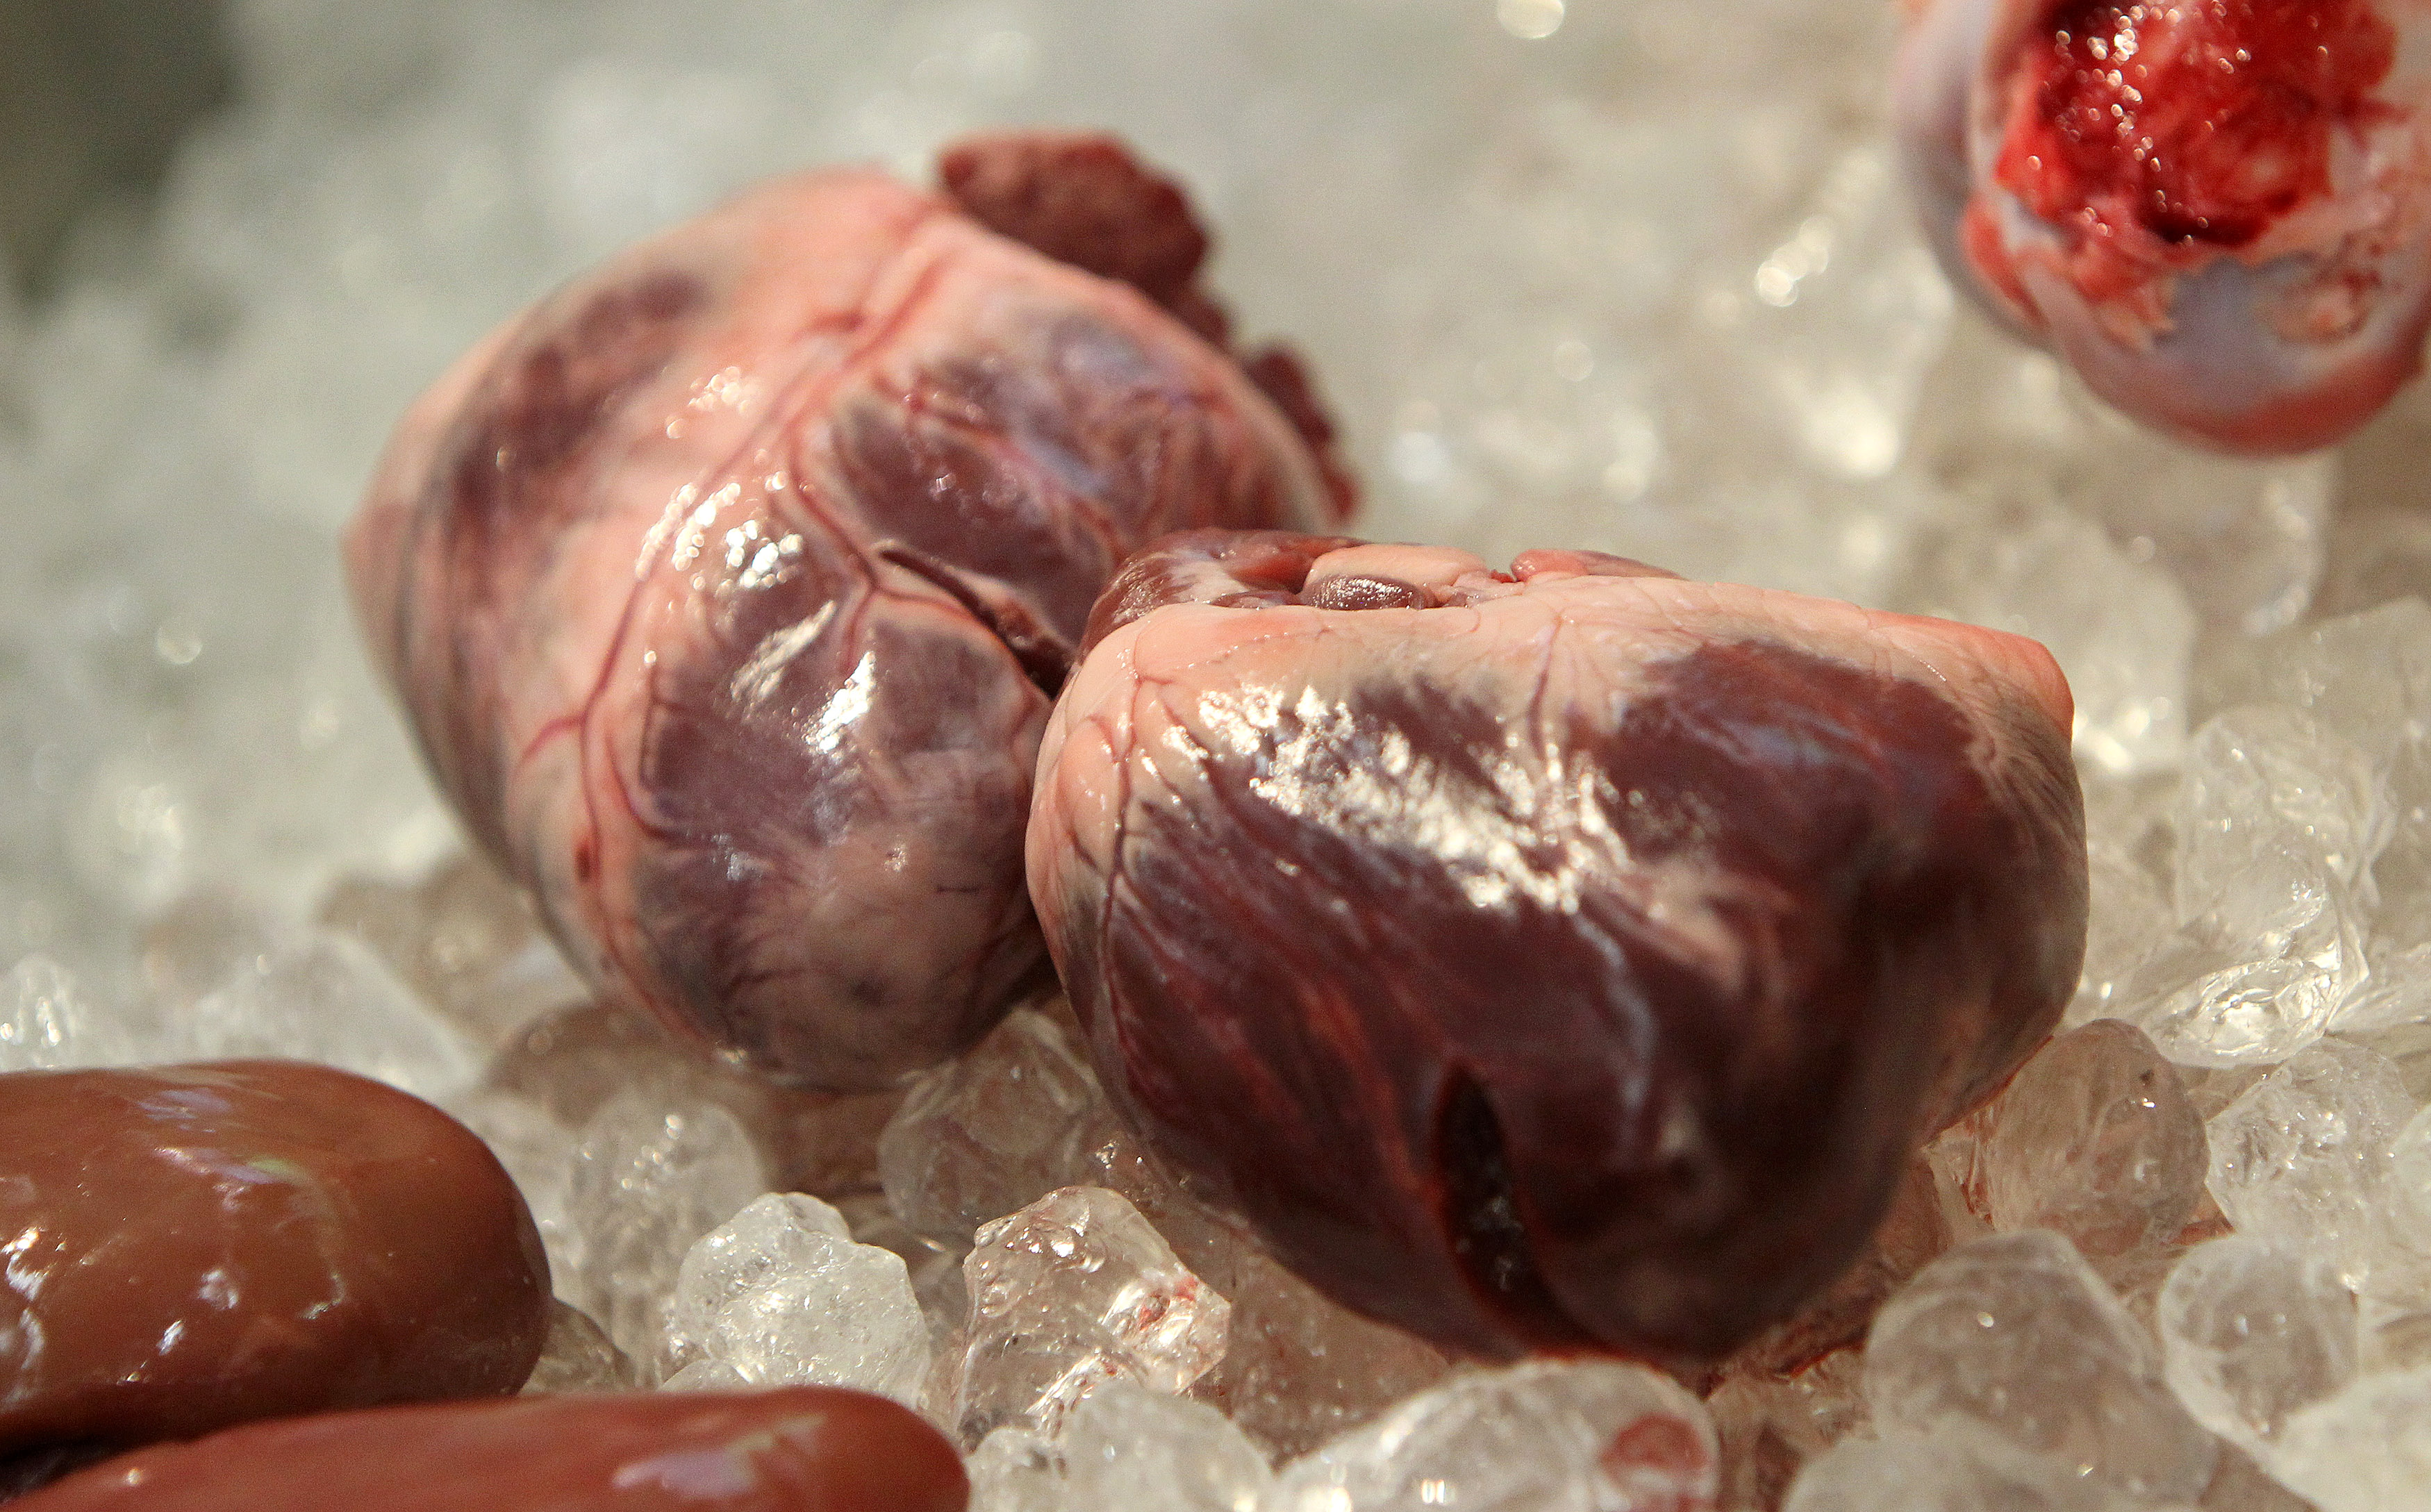 Doctors 'Devastated' by Death of Man Who Got First Pig Heart Transplant